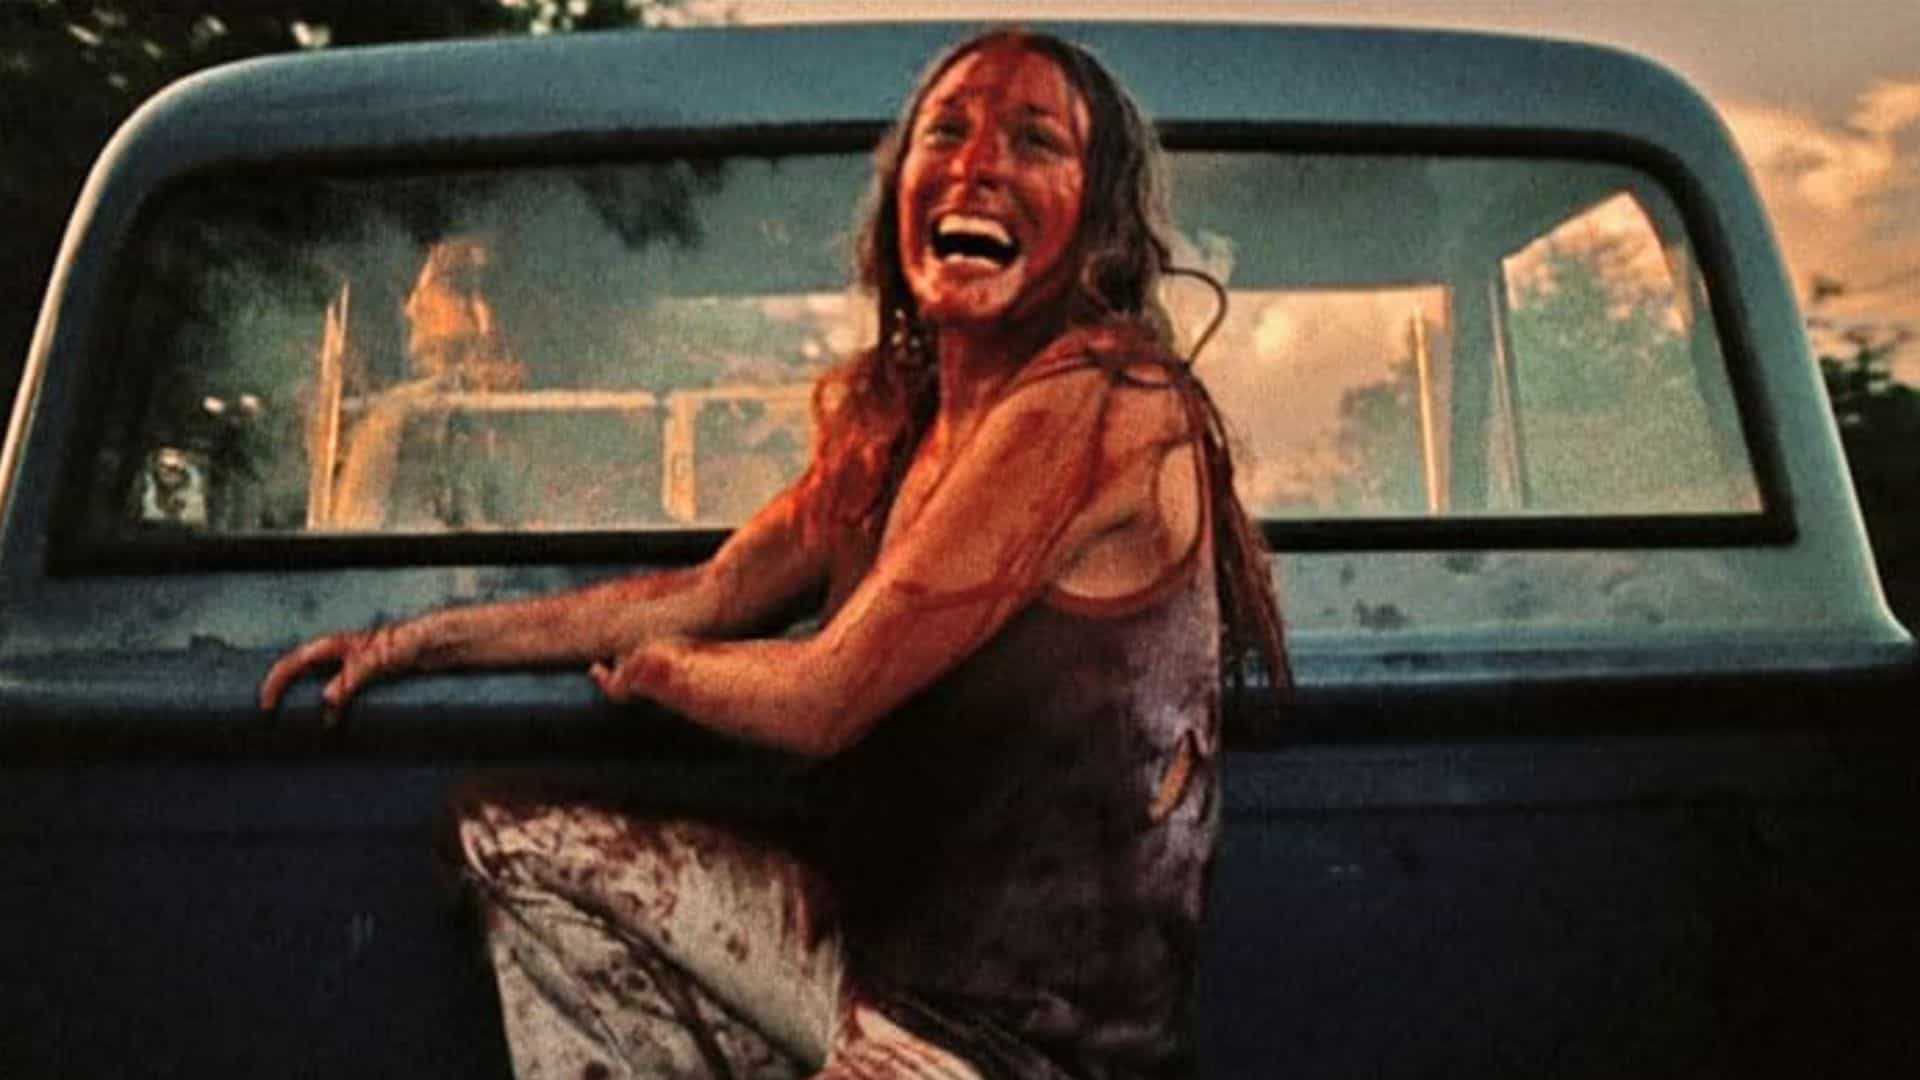 A woman is covered in blood in the bed of a pickup truck in this image from Vortex Inc.